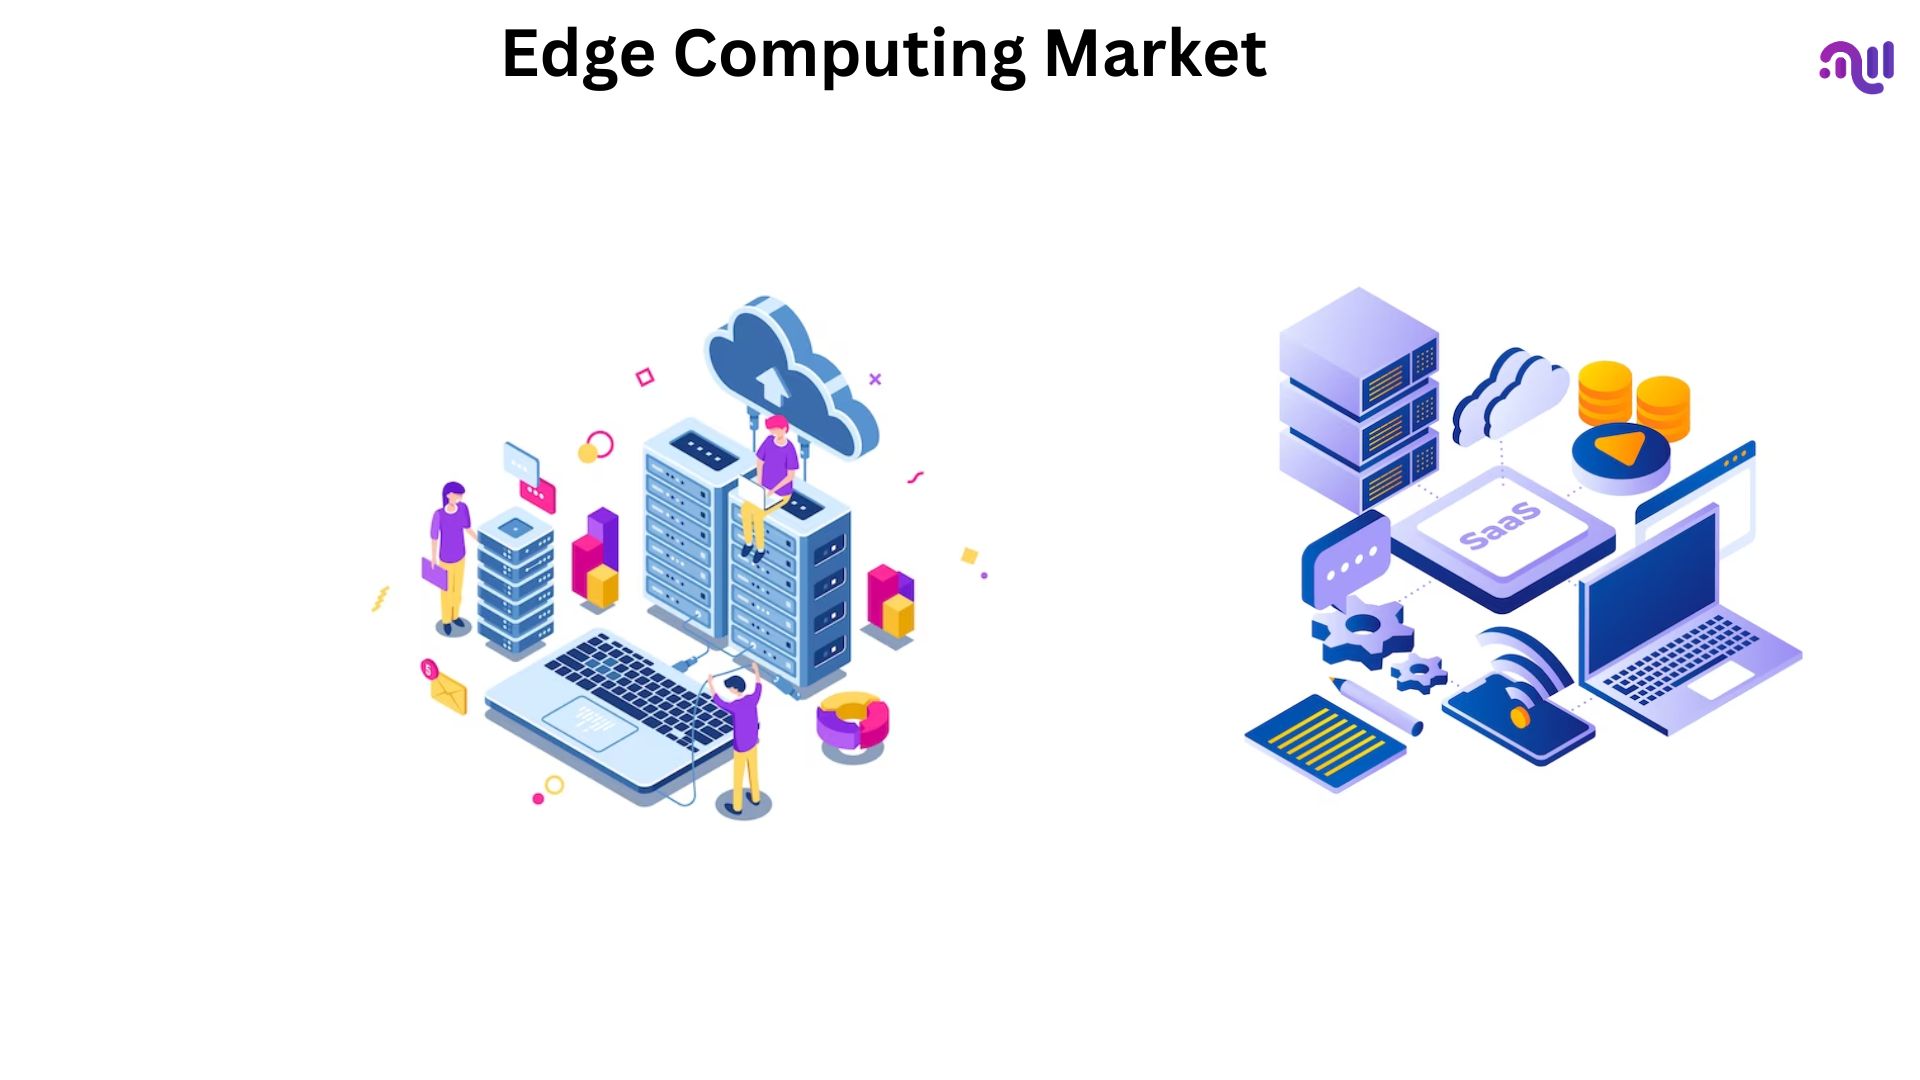 Edge Computing Market Is Predicted USD 206 Billion In Revenues By 2032 At CAGR of 18.3%